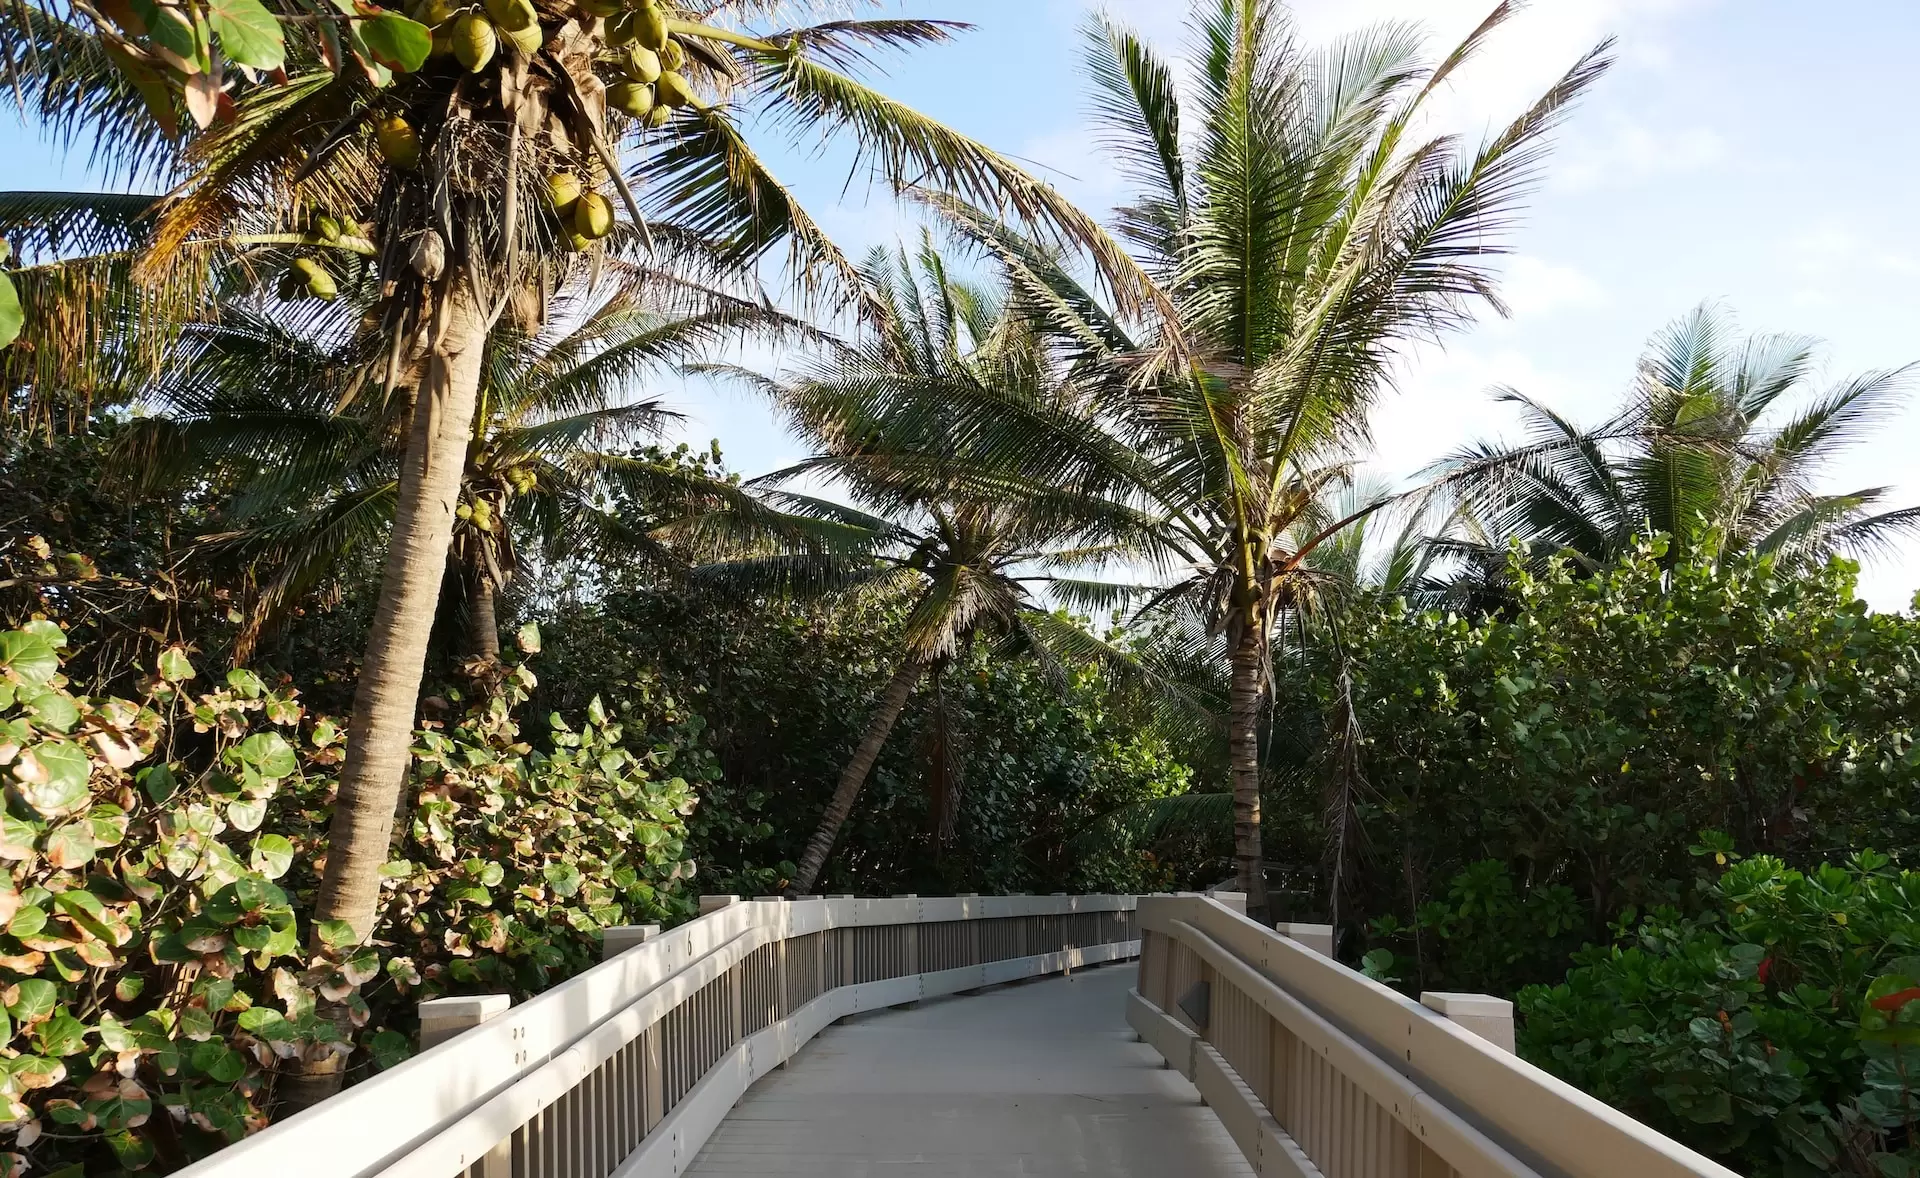 beaches and parks to visit in Boca Raton